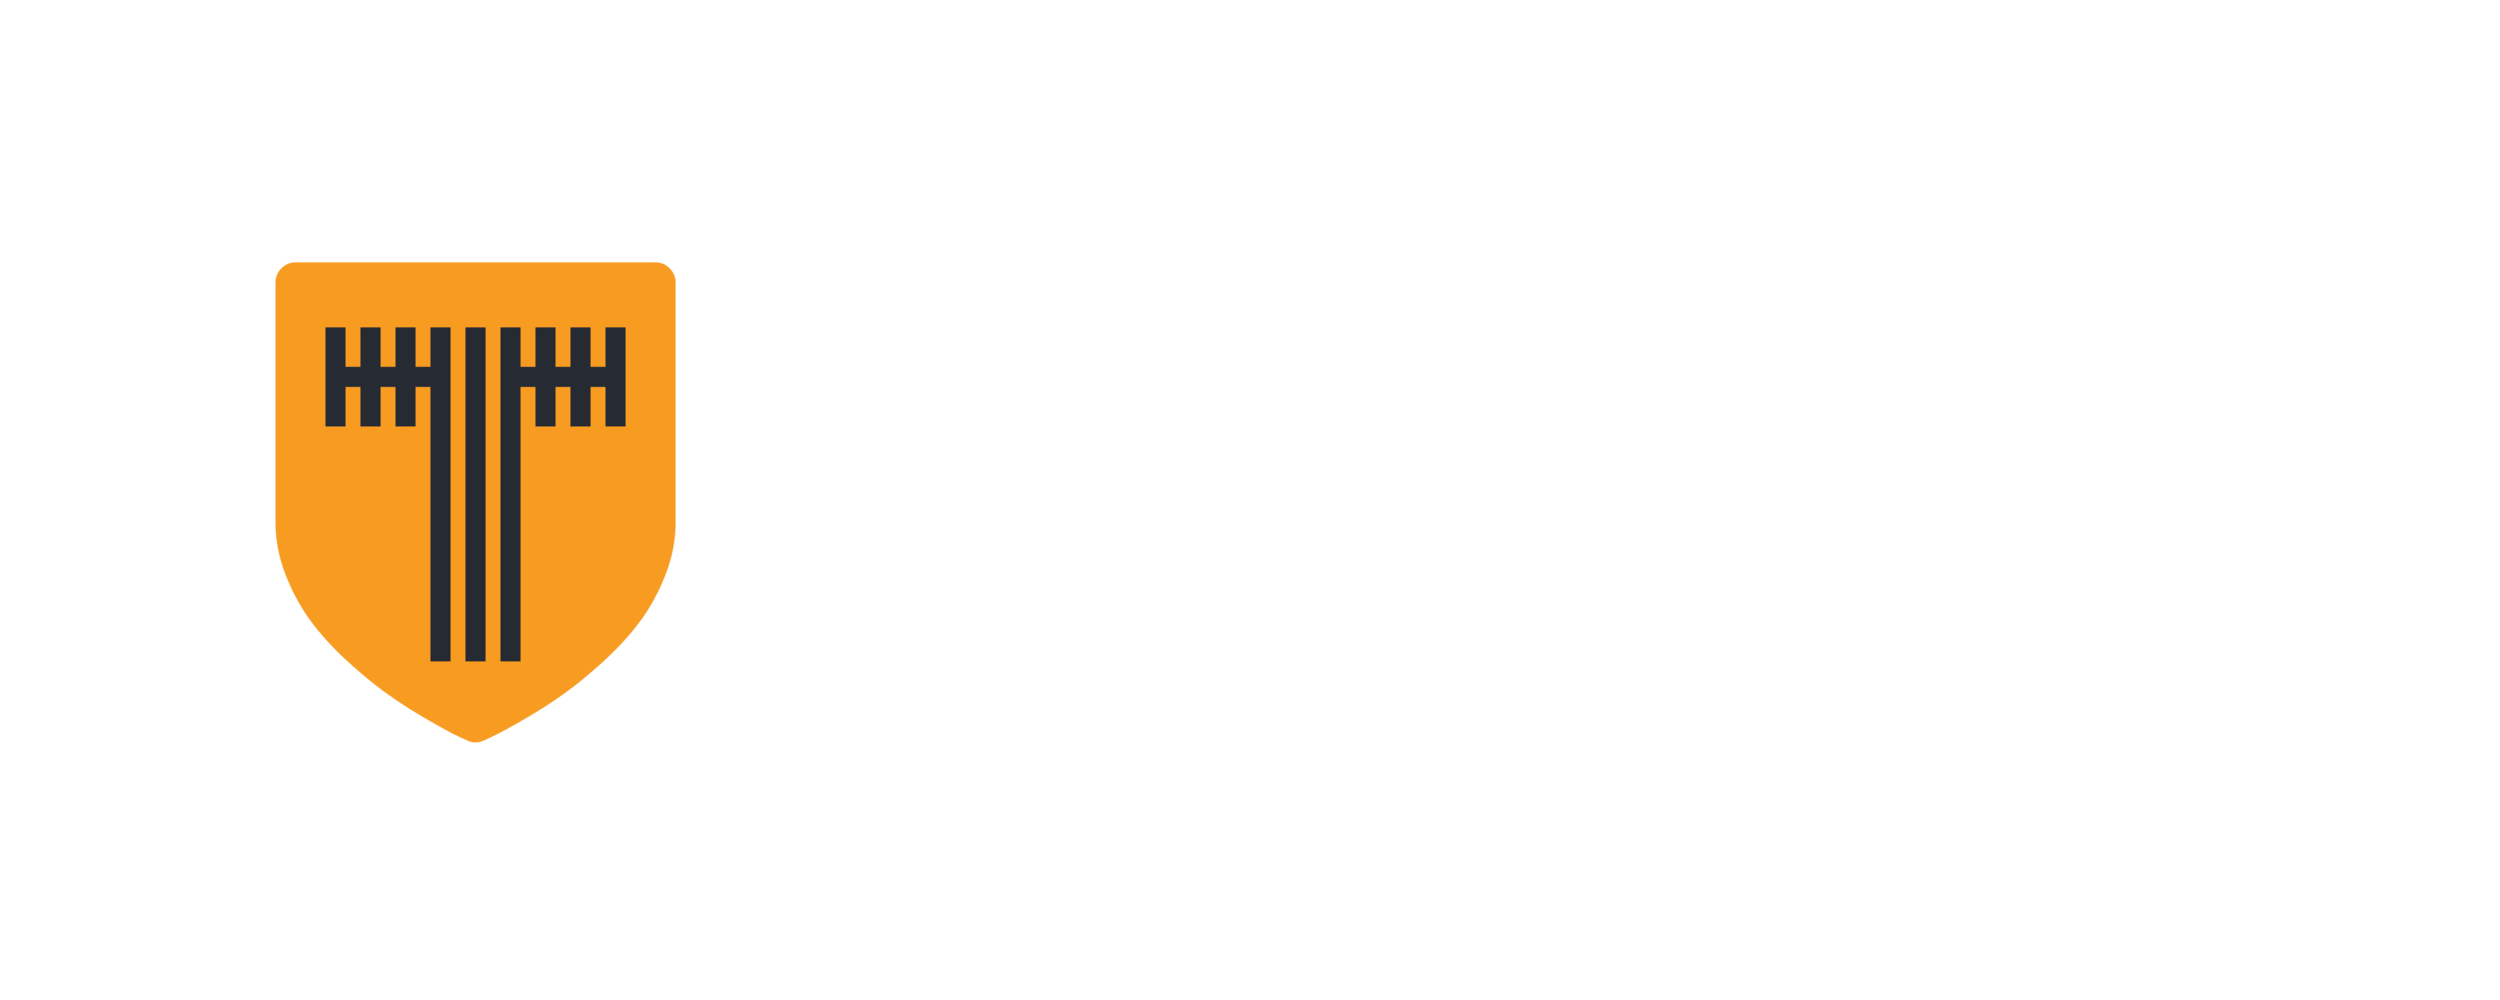 Turnkey Safety Solutions, LLC. - About Us